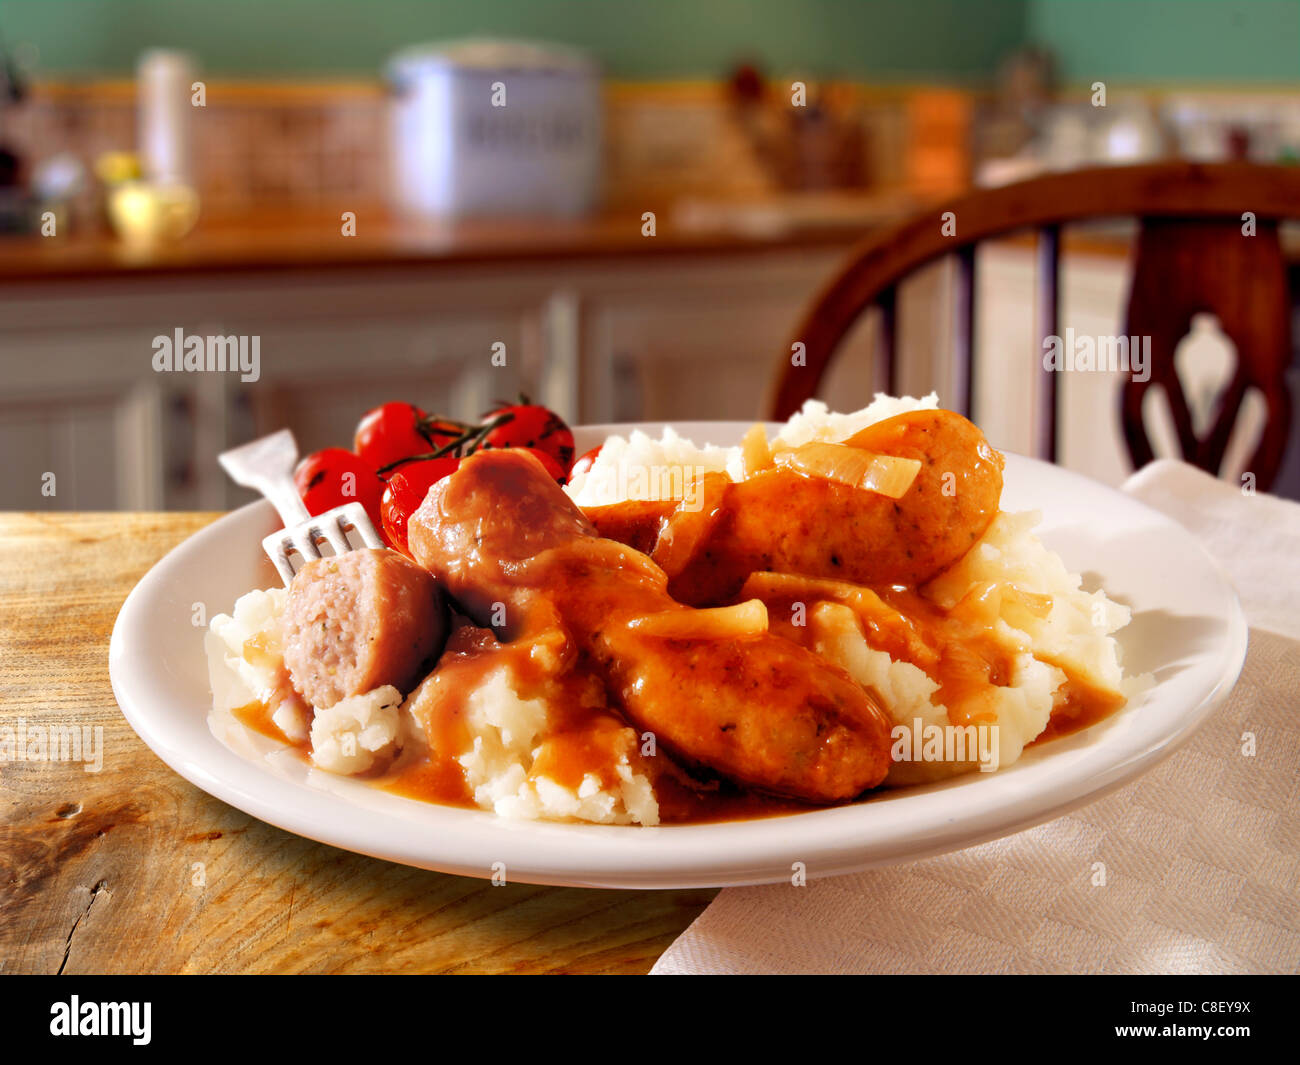 Traditional cooked Sausage and mash served on a white plate in a table setting ready to eat Stock Photo